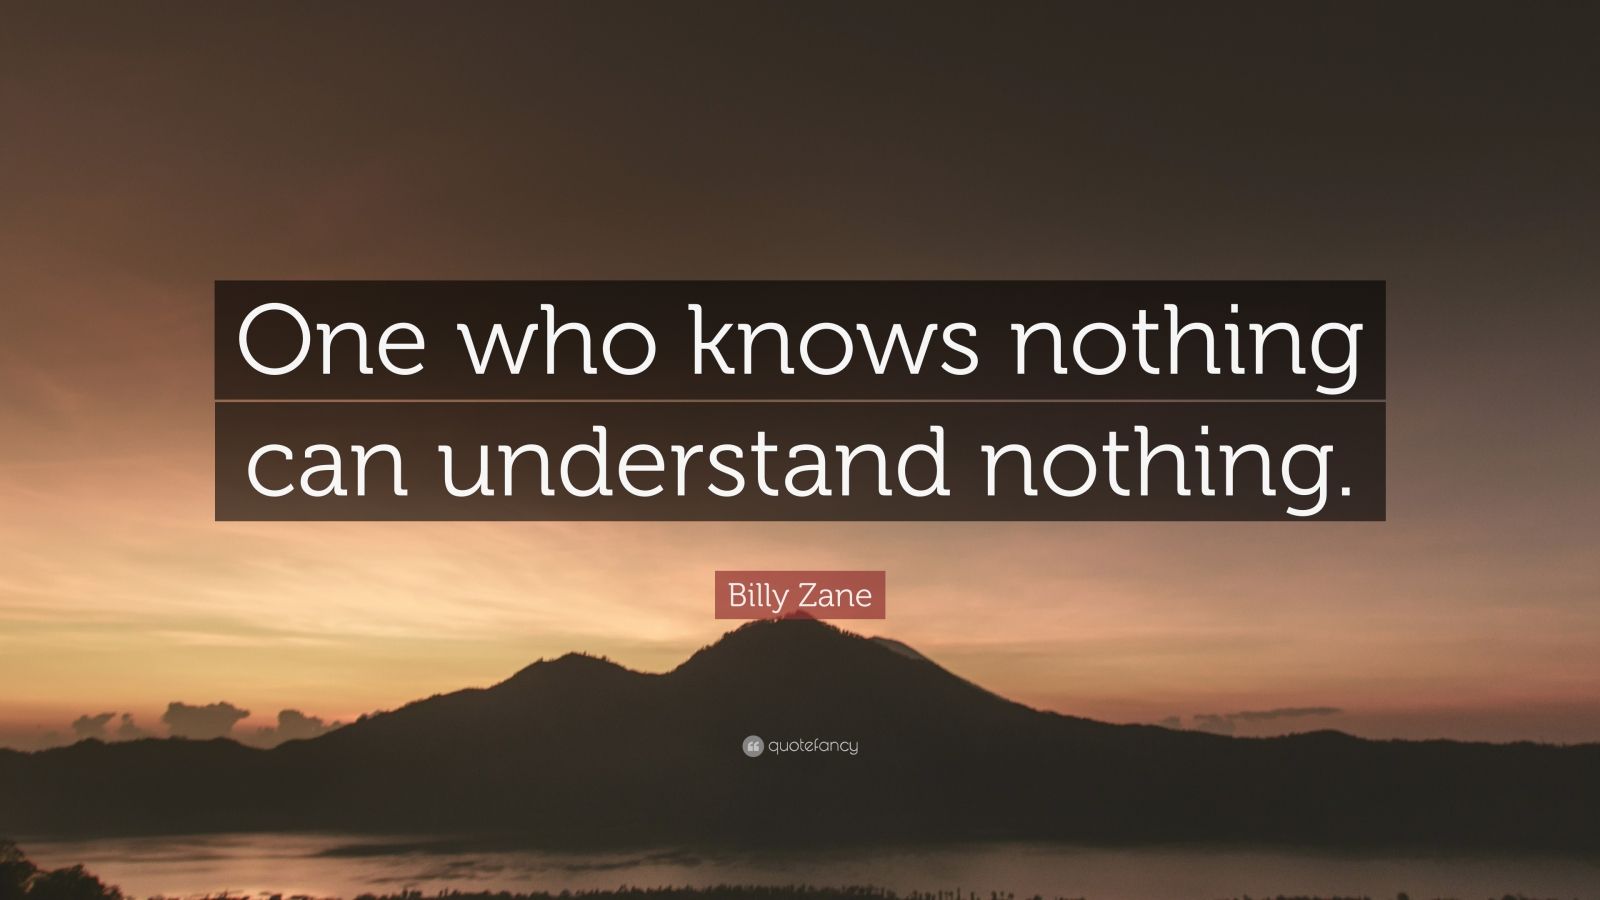 Billy Zane Quote: “One who knows nothing can understand nothing.” (10 ...